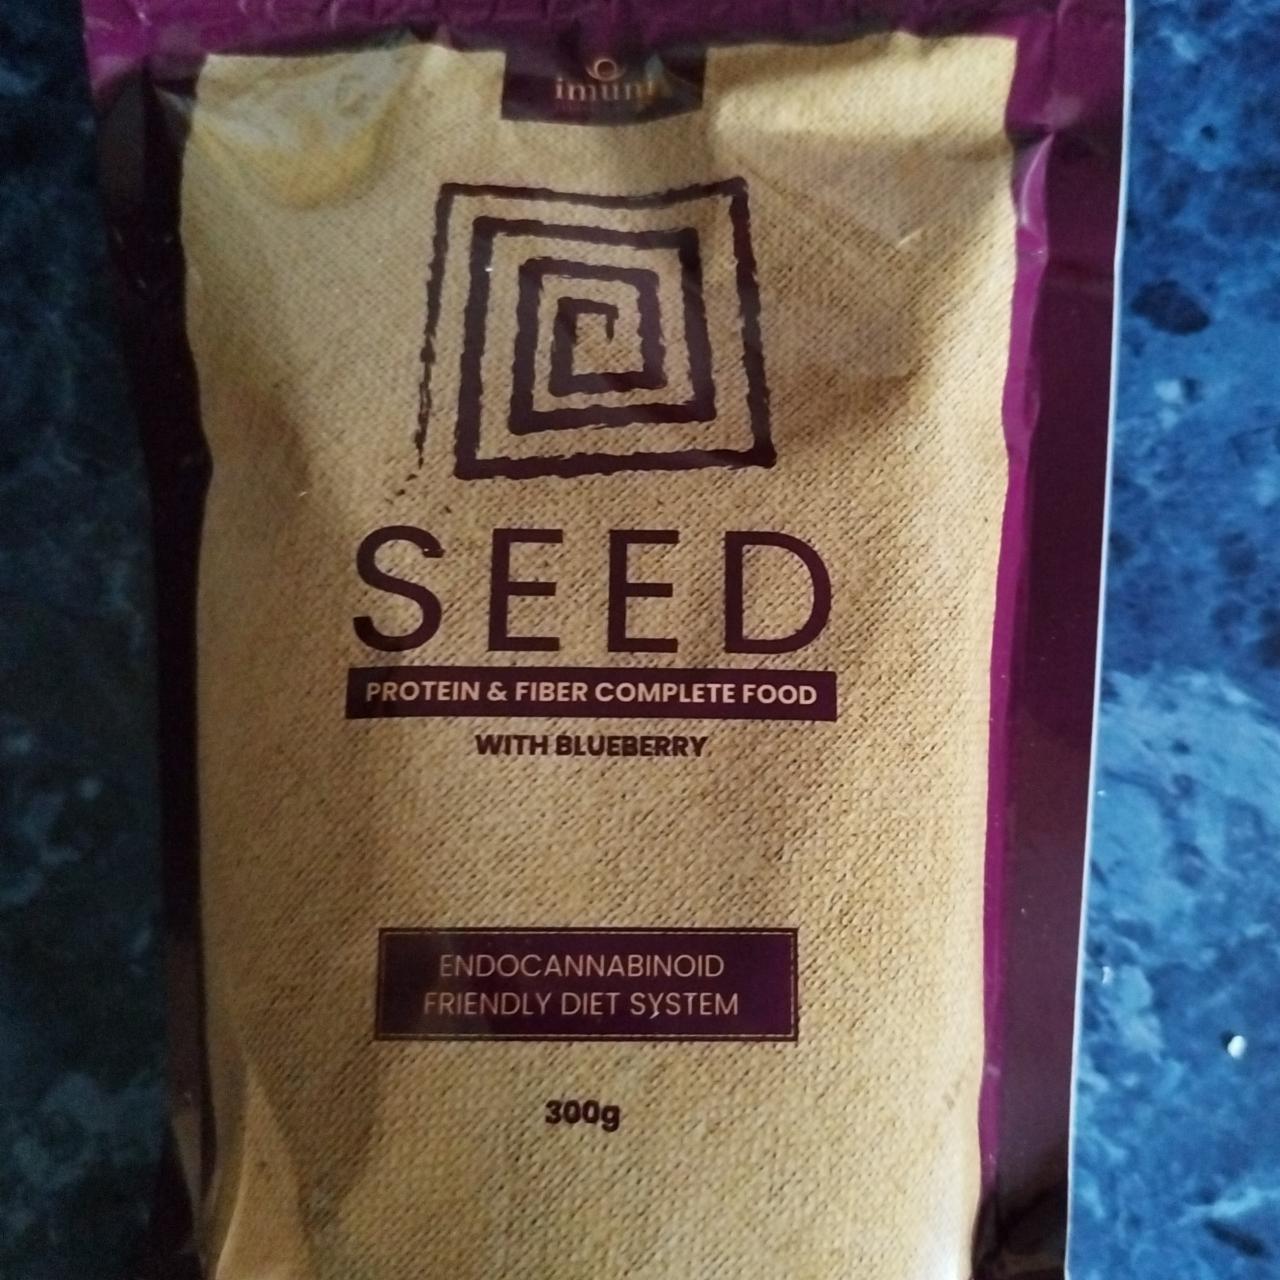 Fotografie - Seed protein & fiber complete food with blueberry Imuni